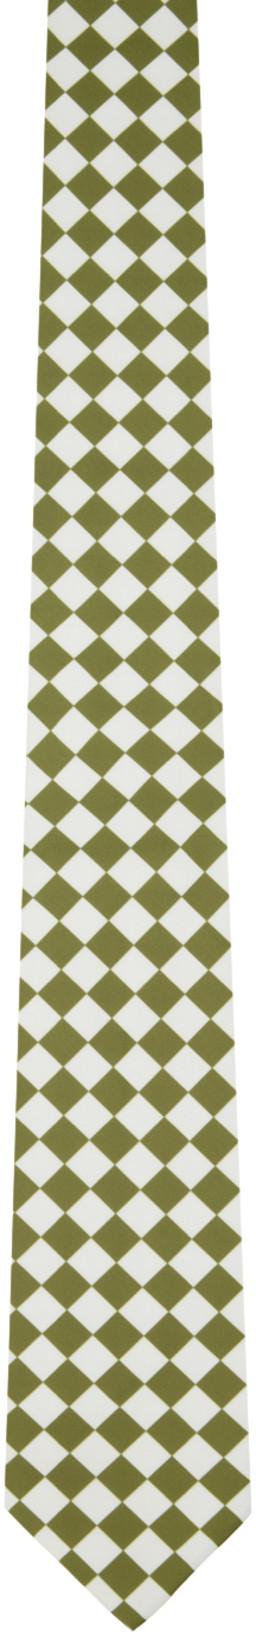 Green & Off-White Chess Print Neck Tie and Pocket Square Set by CONNOR MC KNIGHT